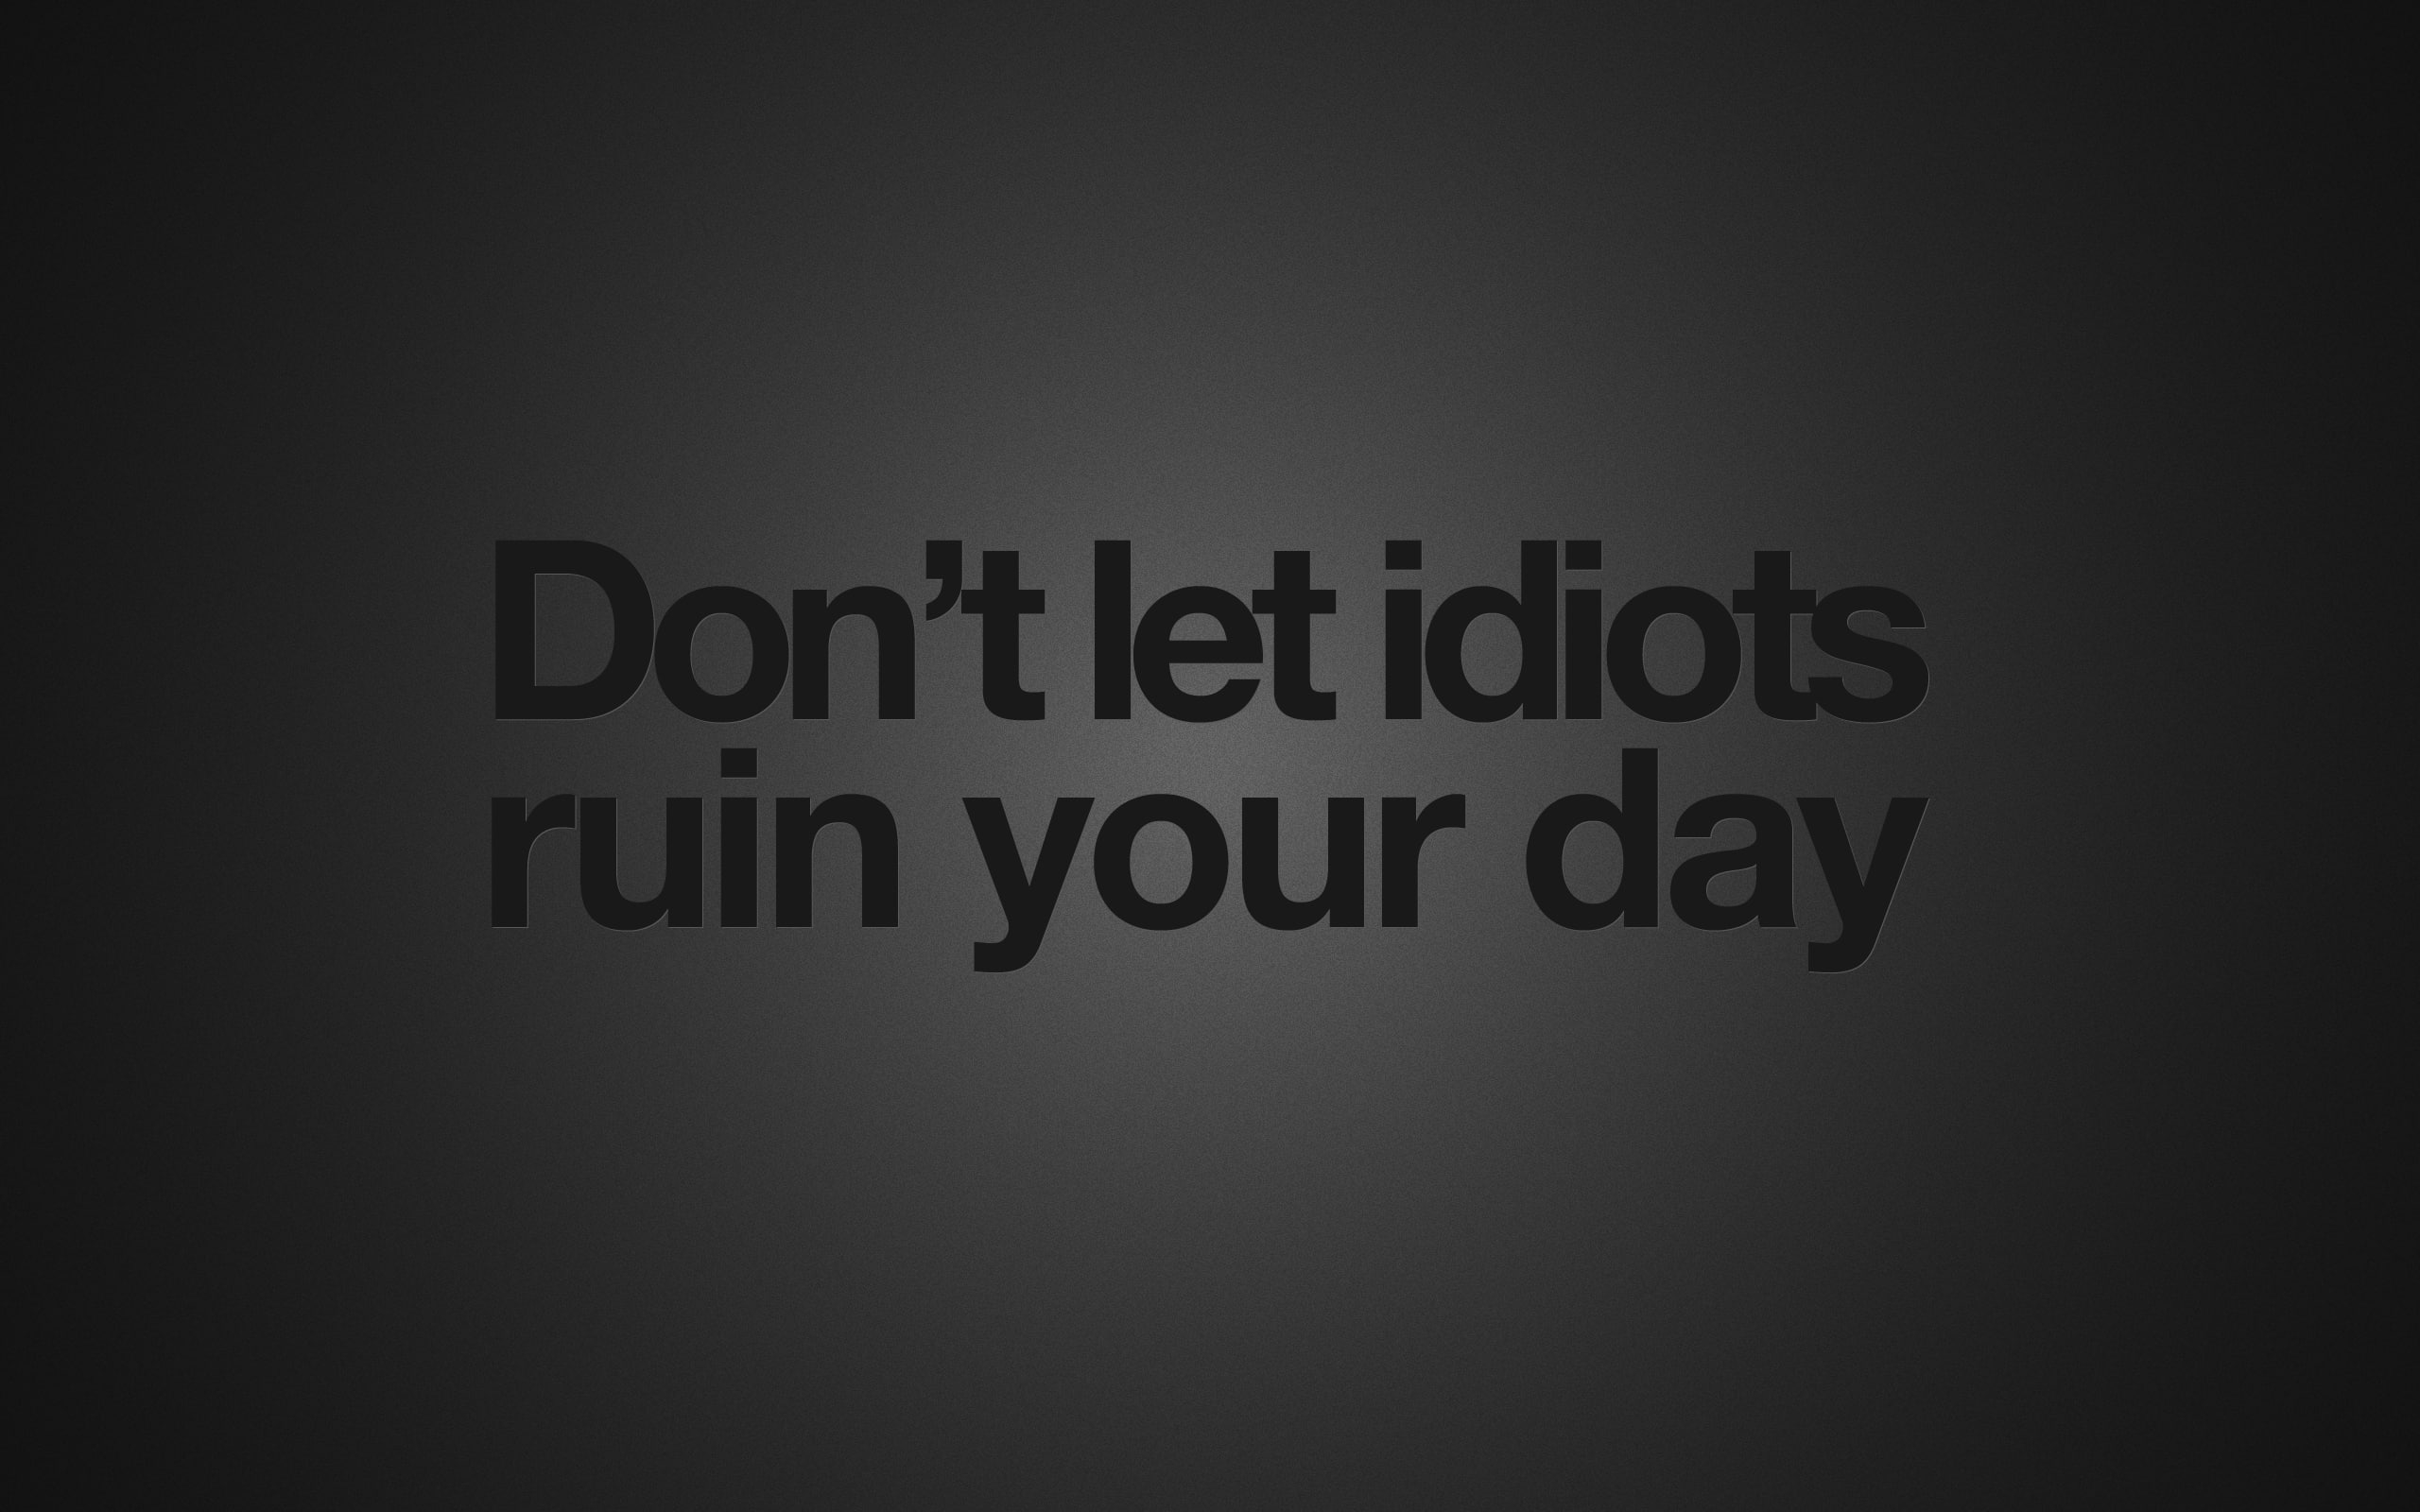 Wallpaper don’t let idiots ruin your day text, quote, humor, minimalism